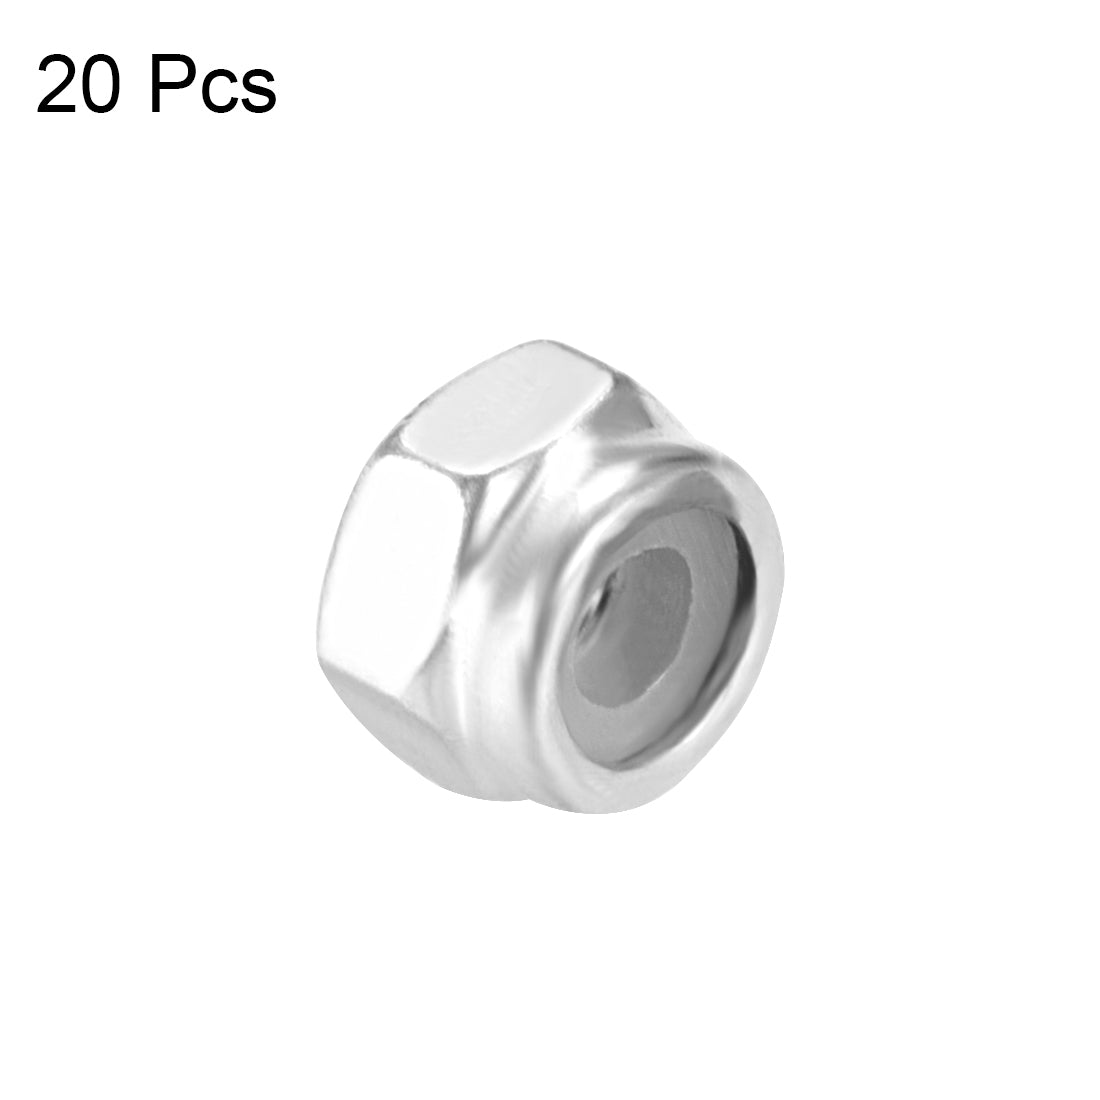 uxcell Uxcell M2 x 0.4mm Nylon Insert Hex Lock Nuts, Carbon Steel White Zinc Plated, 20 Pcs